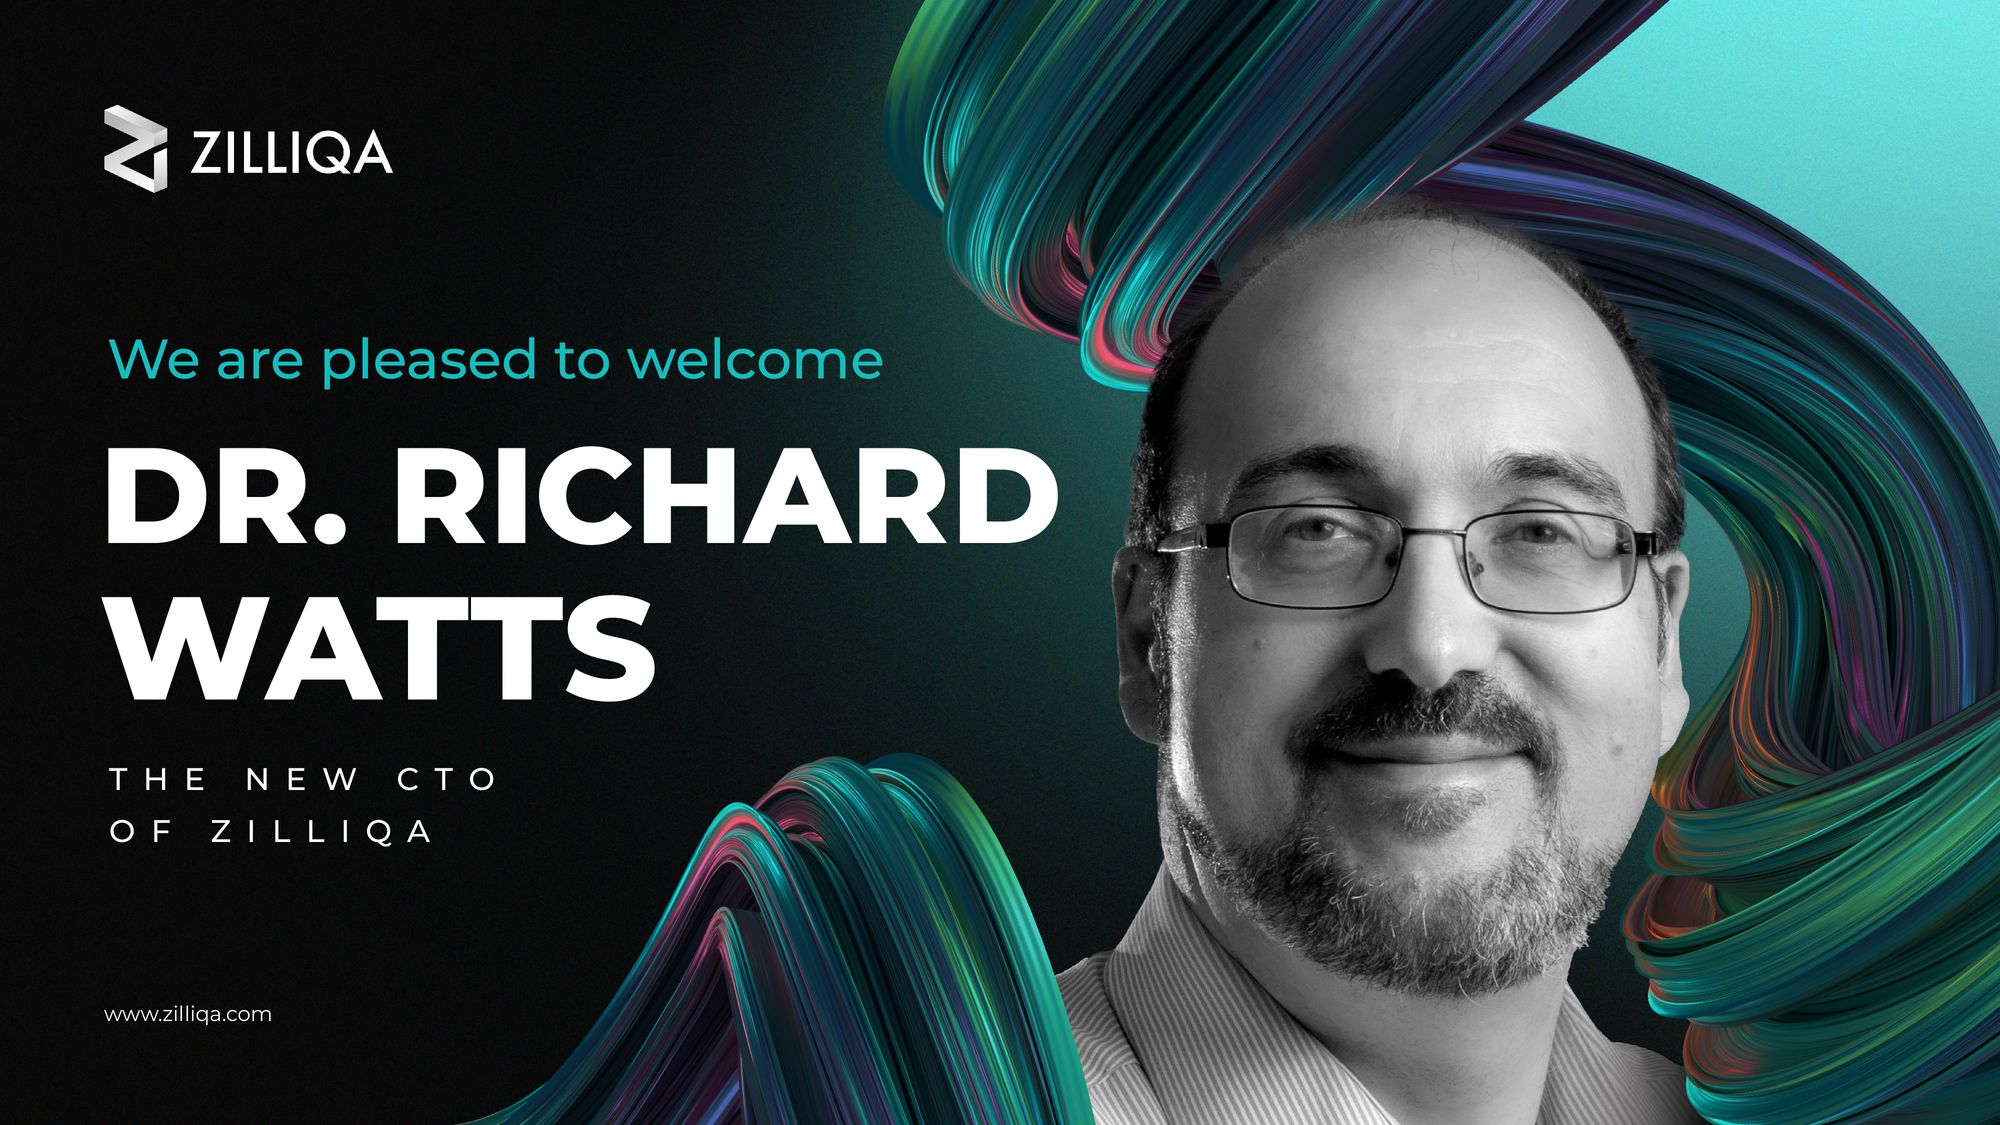 Dr. Richard Watts Joins As CTO In Zilliqa’s Latest Strategic Hire